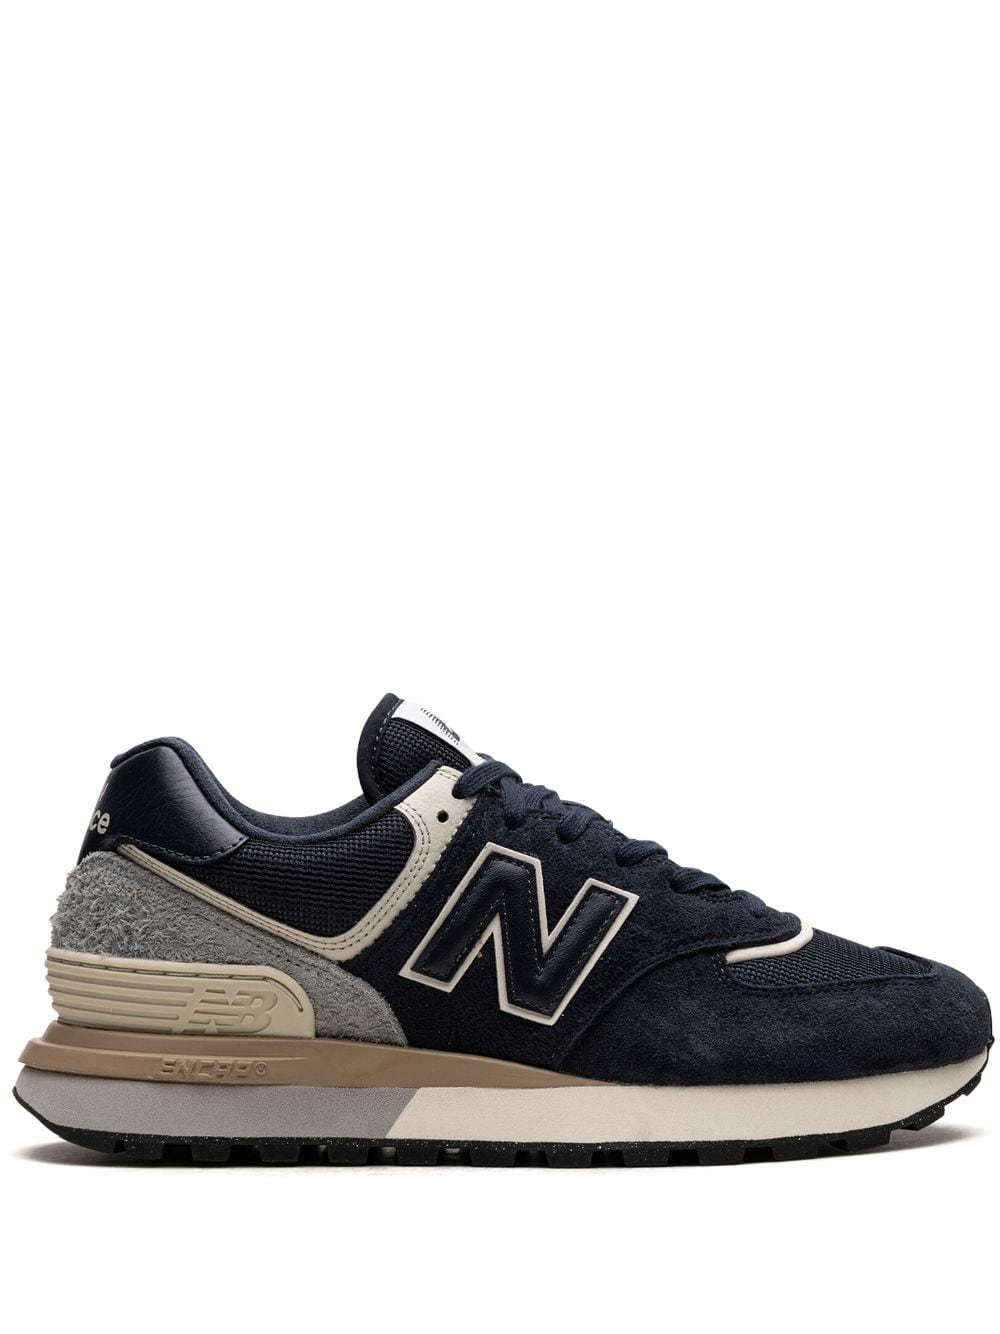 New Balance 574 "Blue White" sneakers